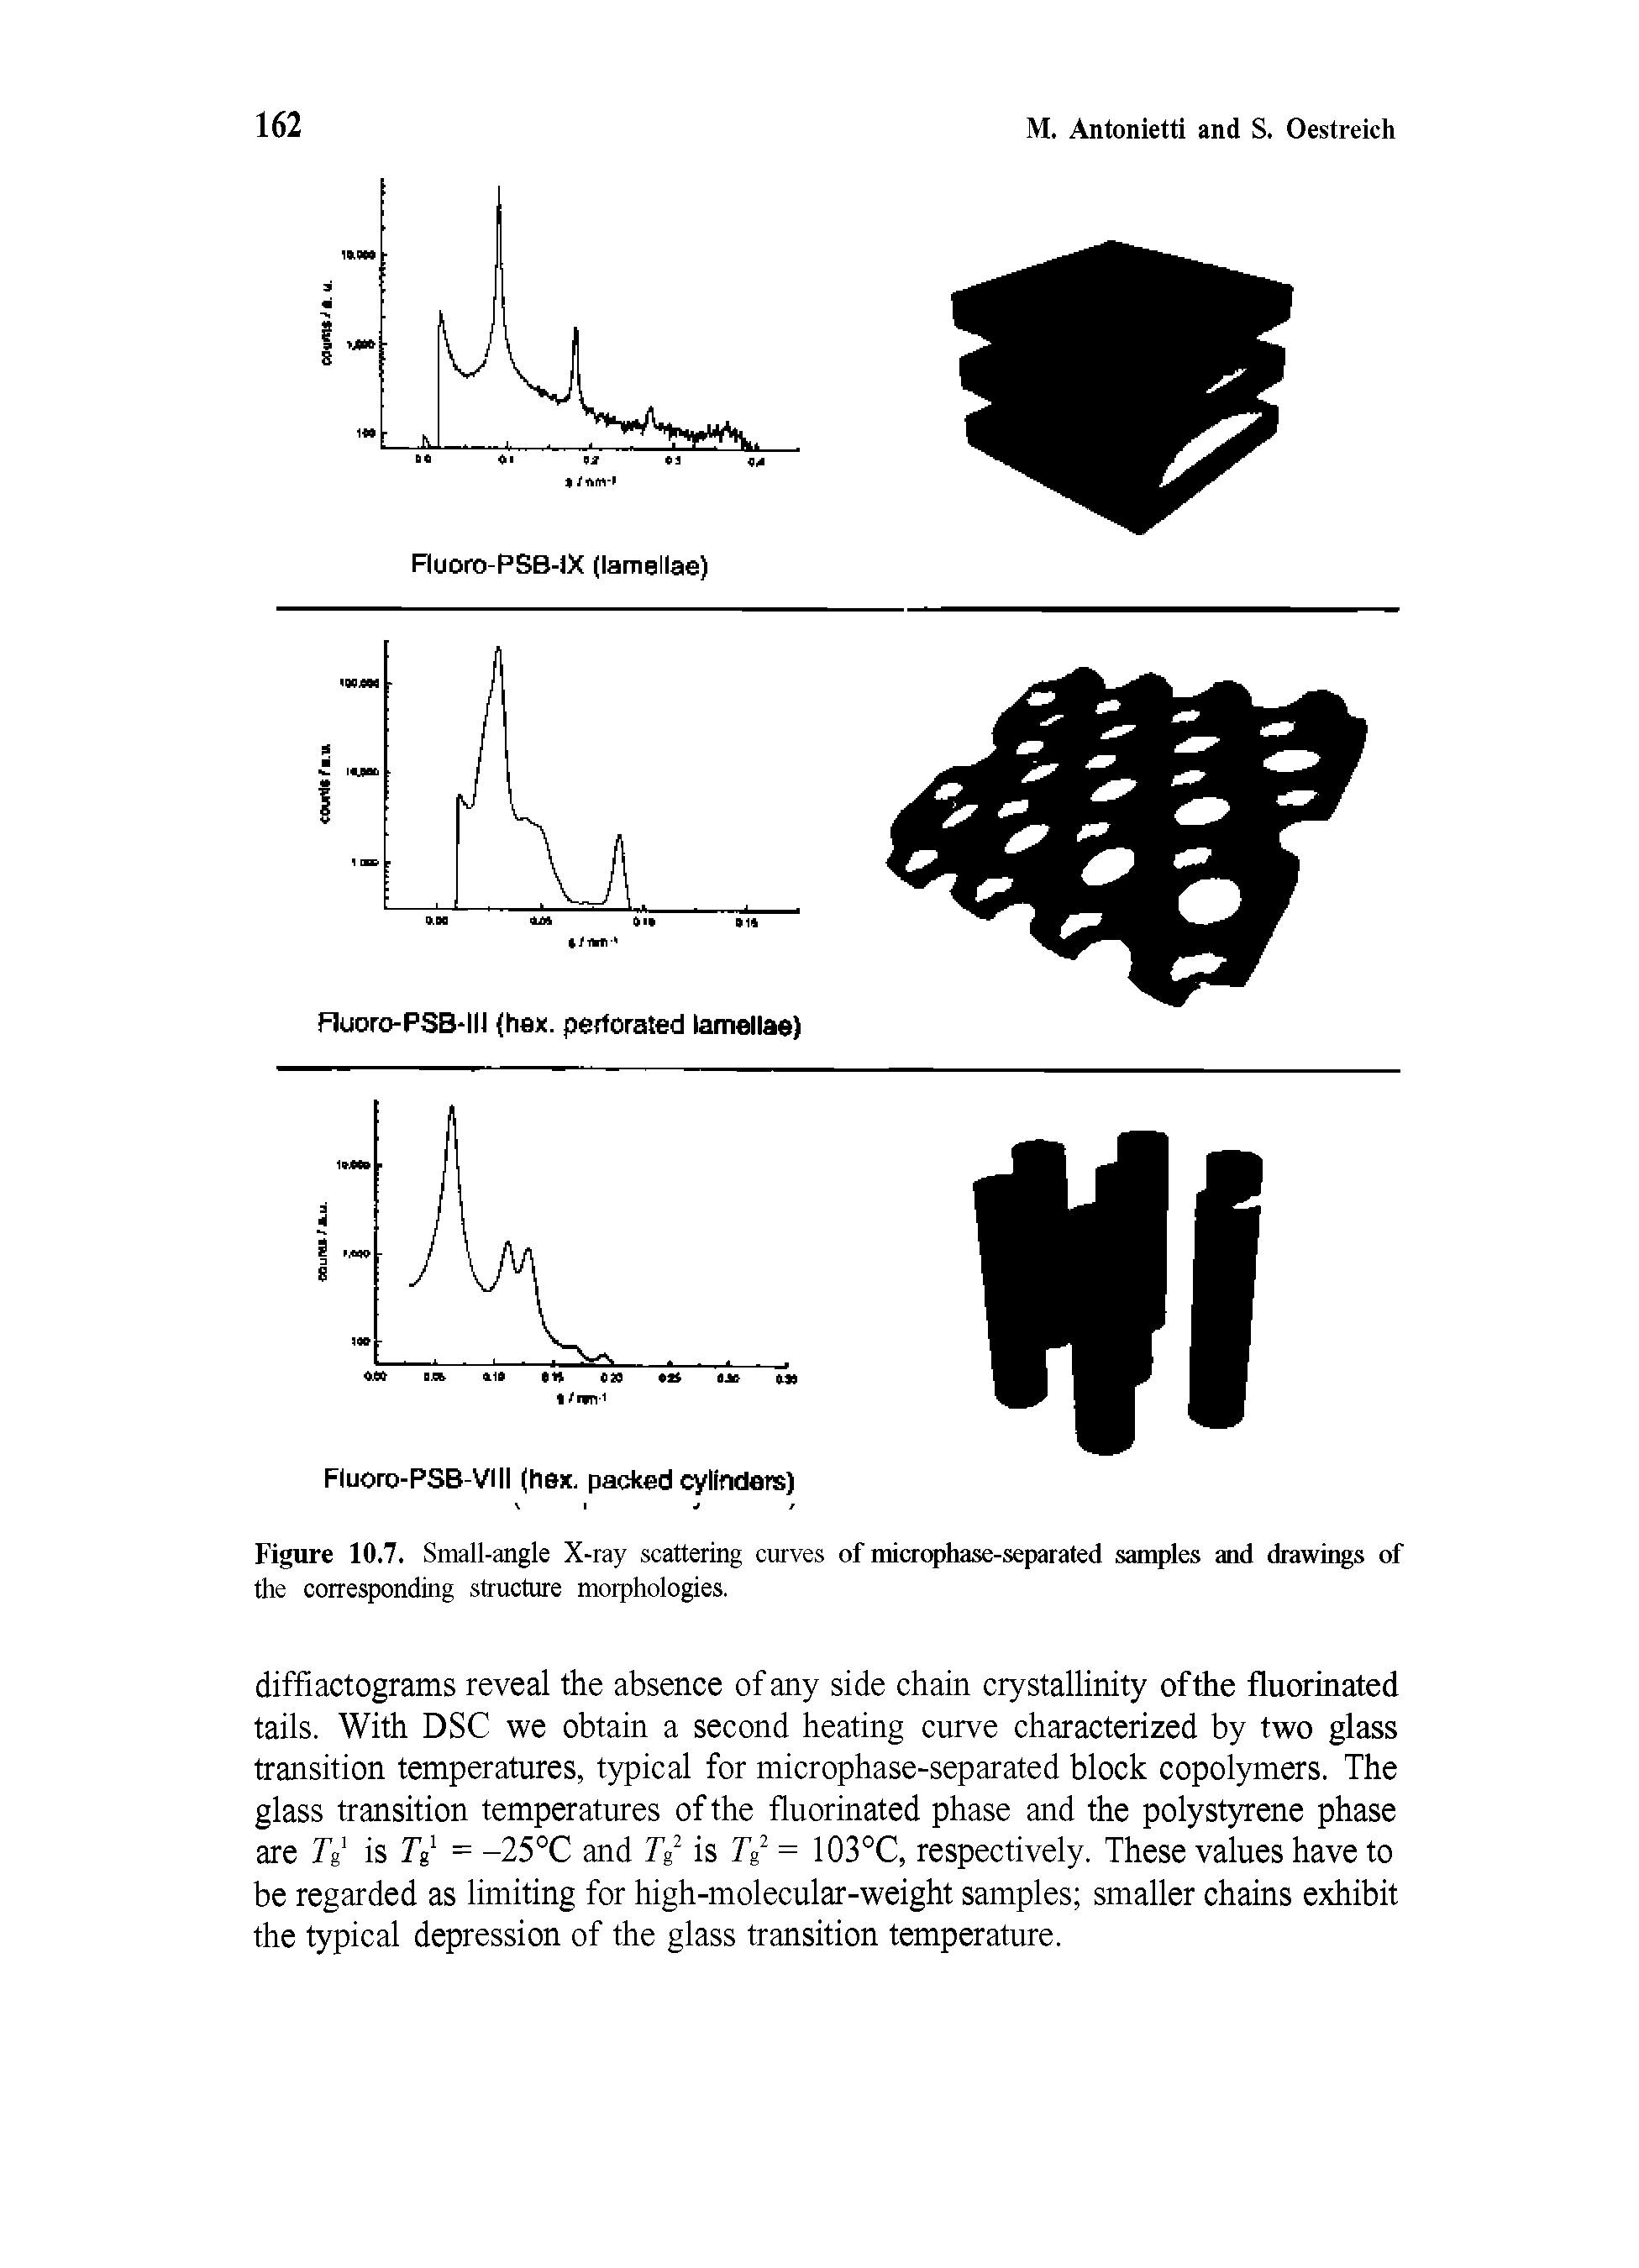 Figure 10.7. Small-angle X-ray scattering curves of microphase-separated samples and drawings of the corresponding structure morphologies.